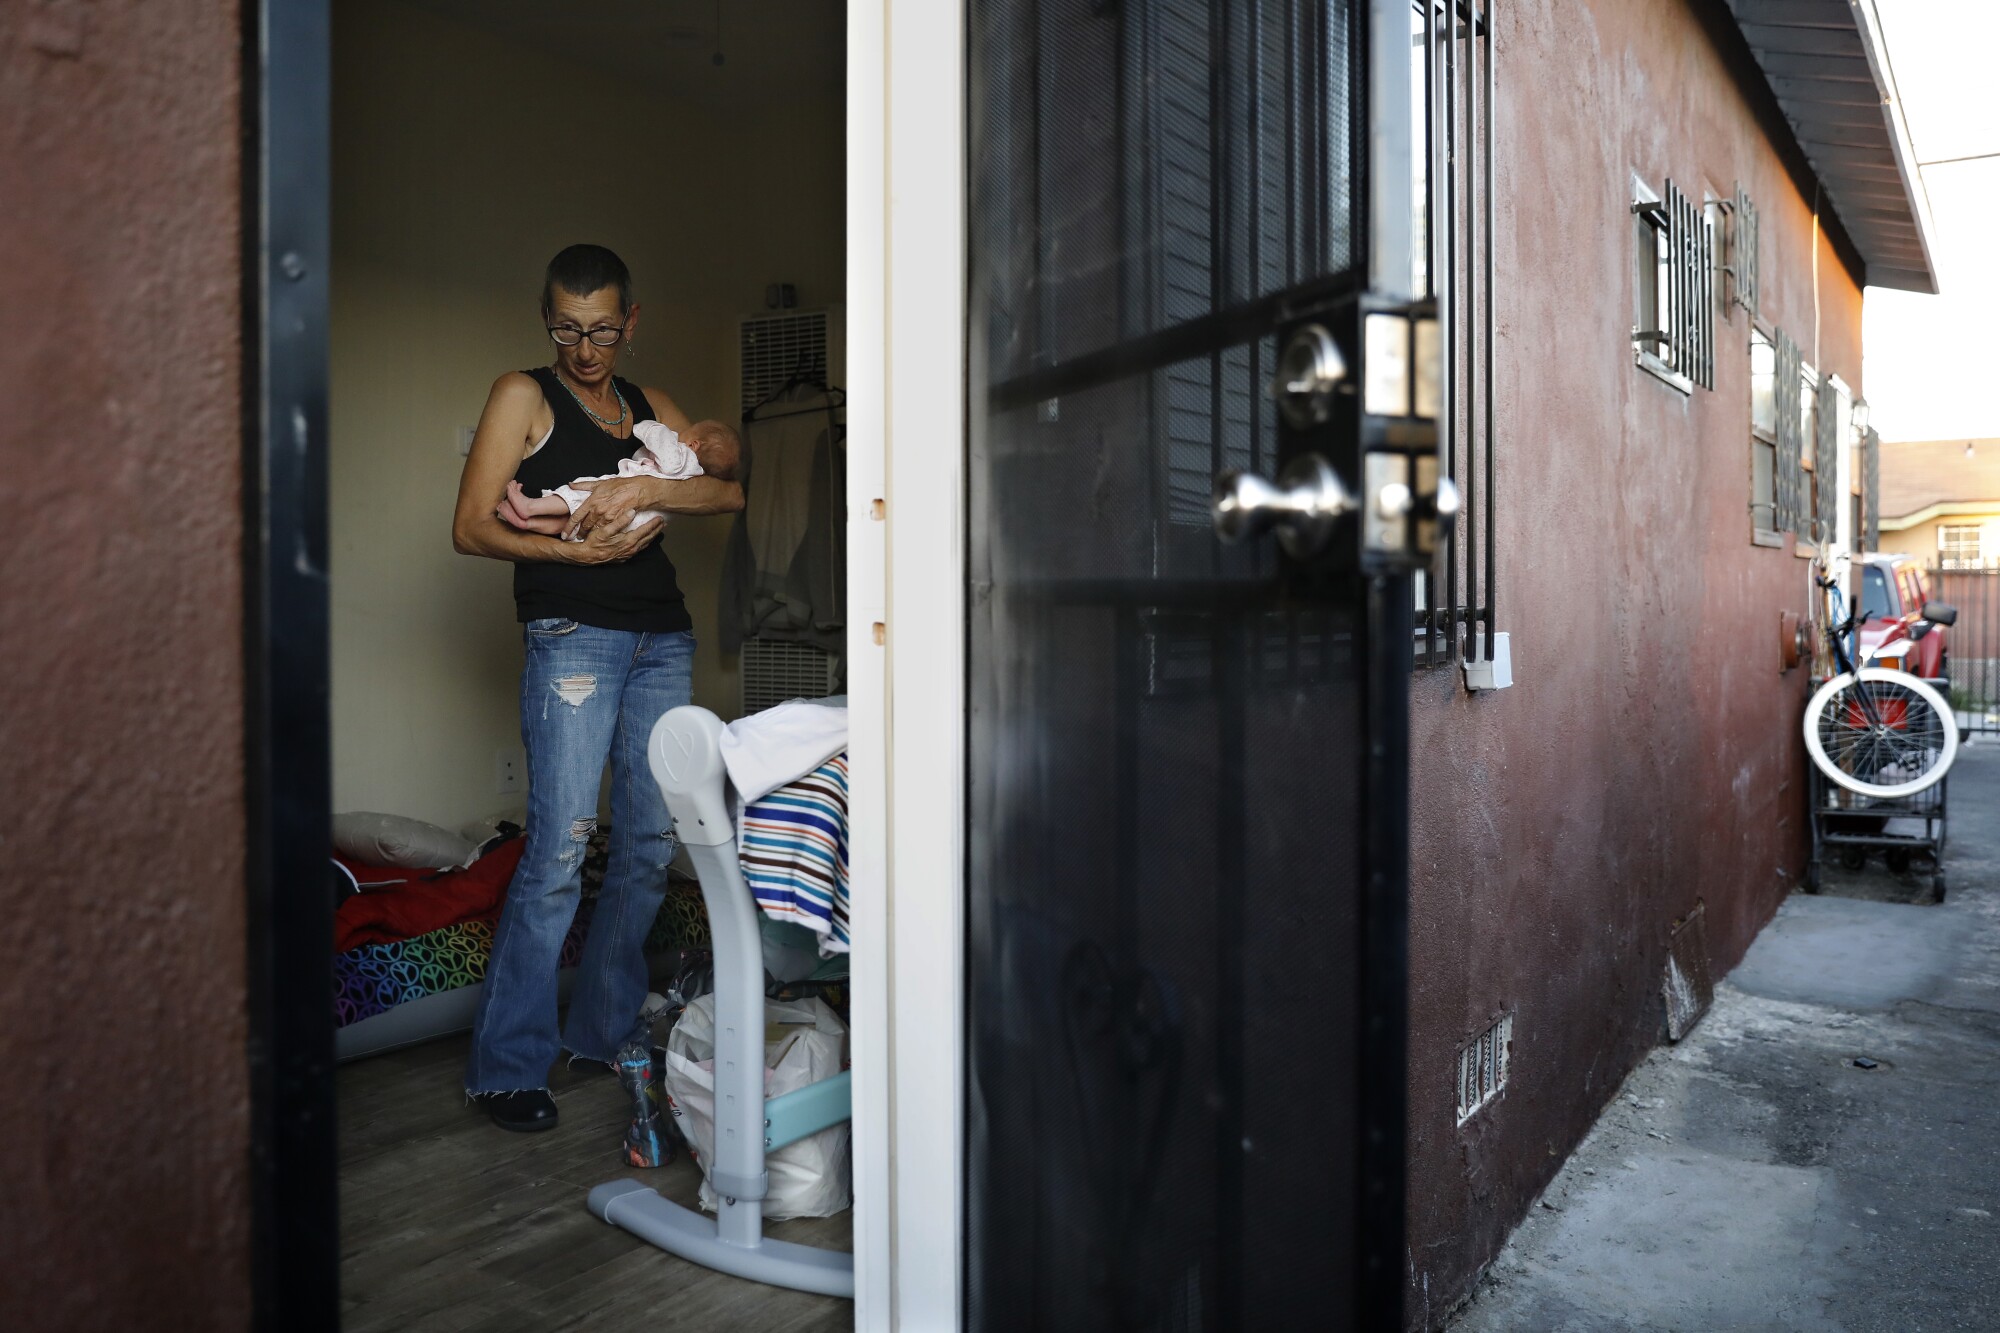 A woman holds a baby visible through an open door of an apartment.